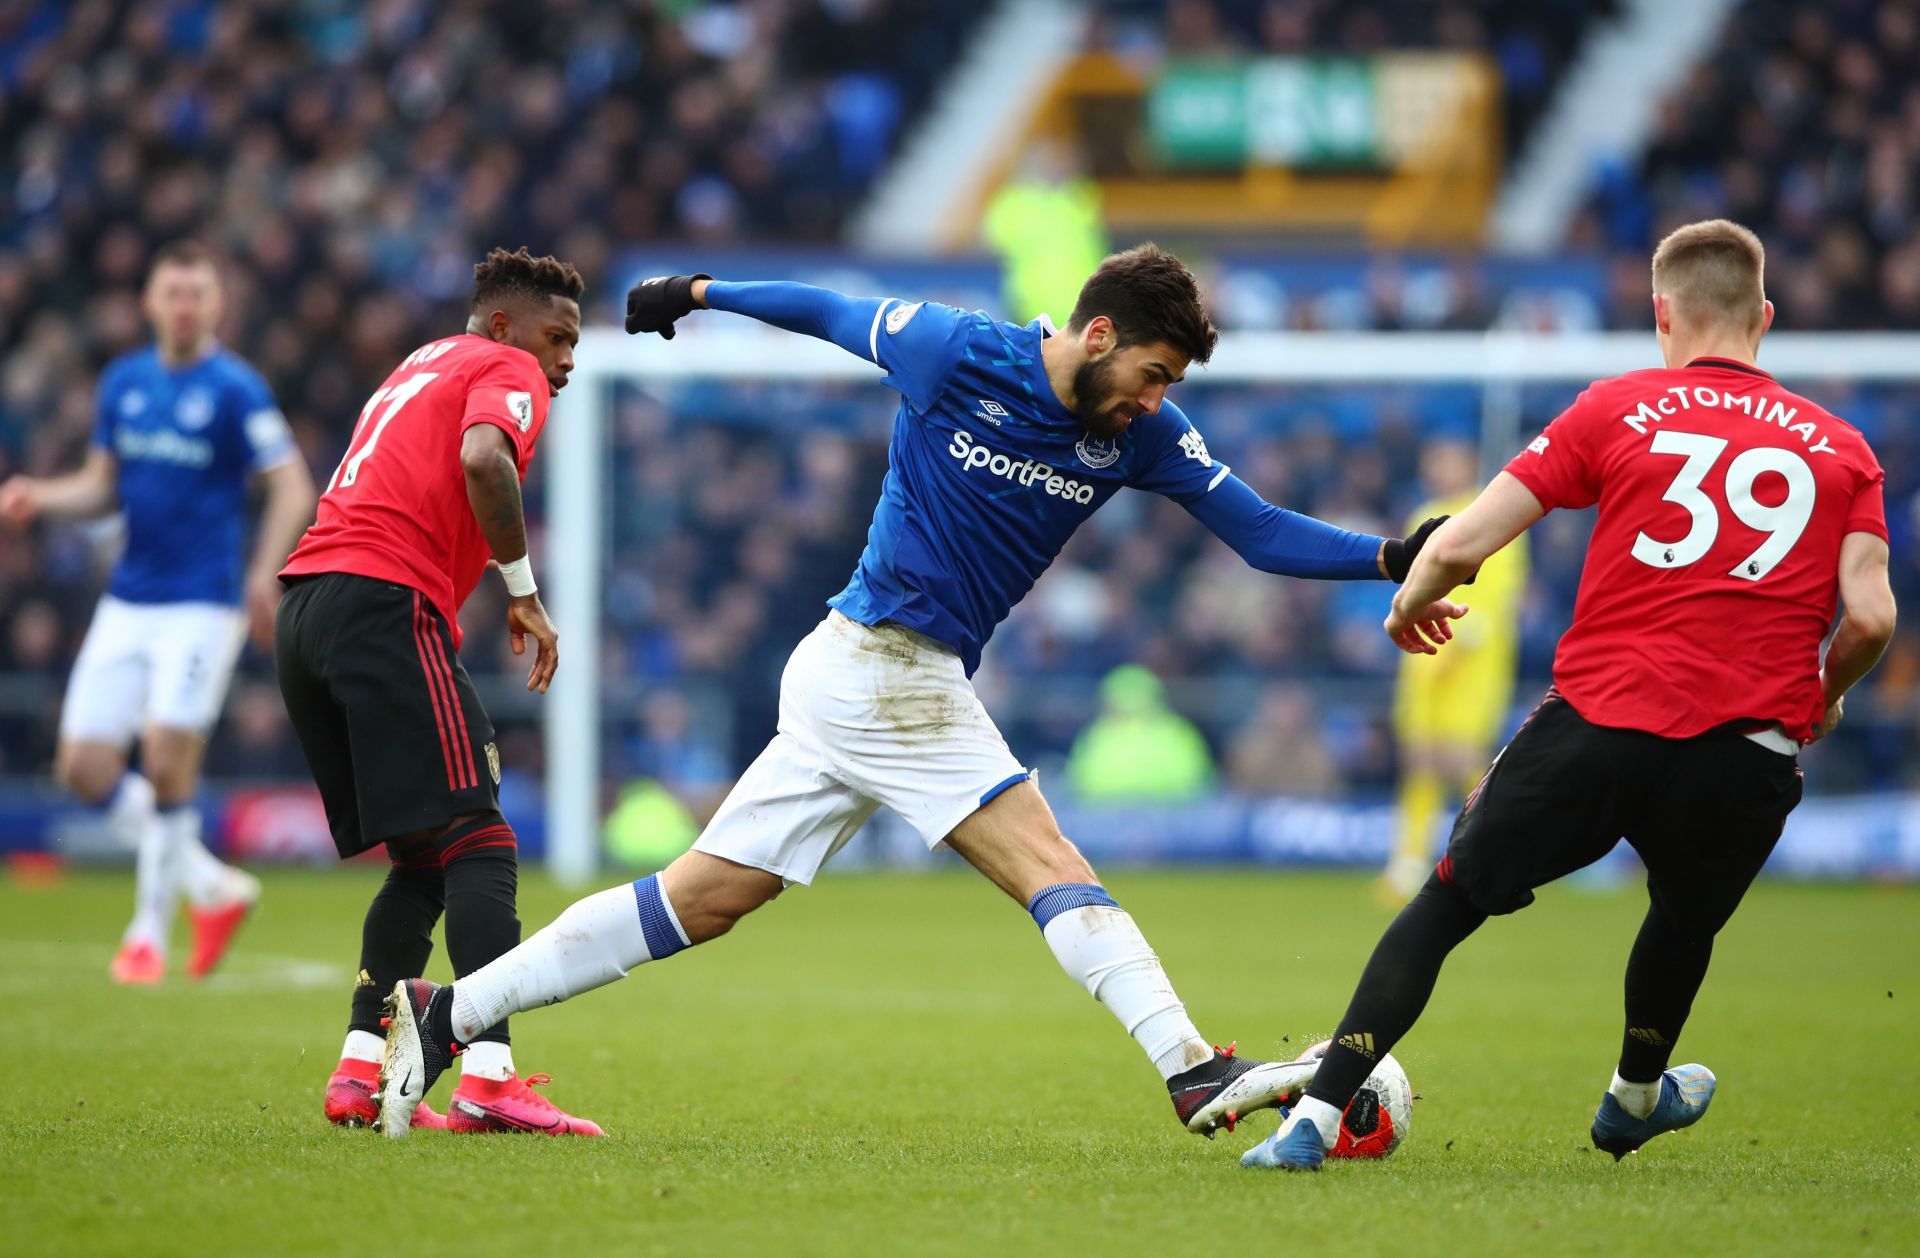 Fred (left) and McTominay (#39) battle against Everton.